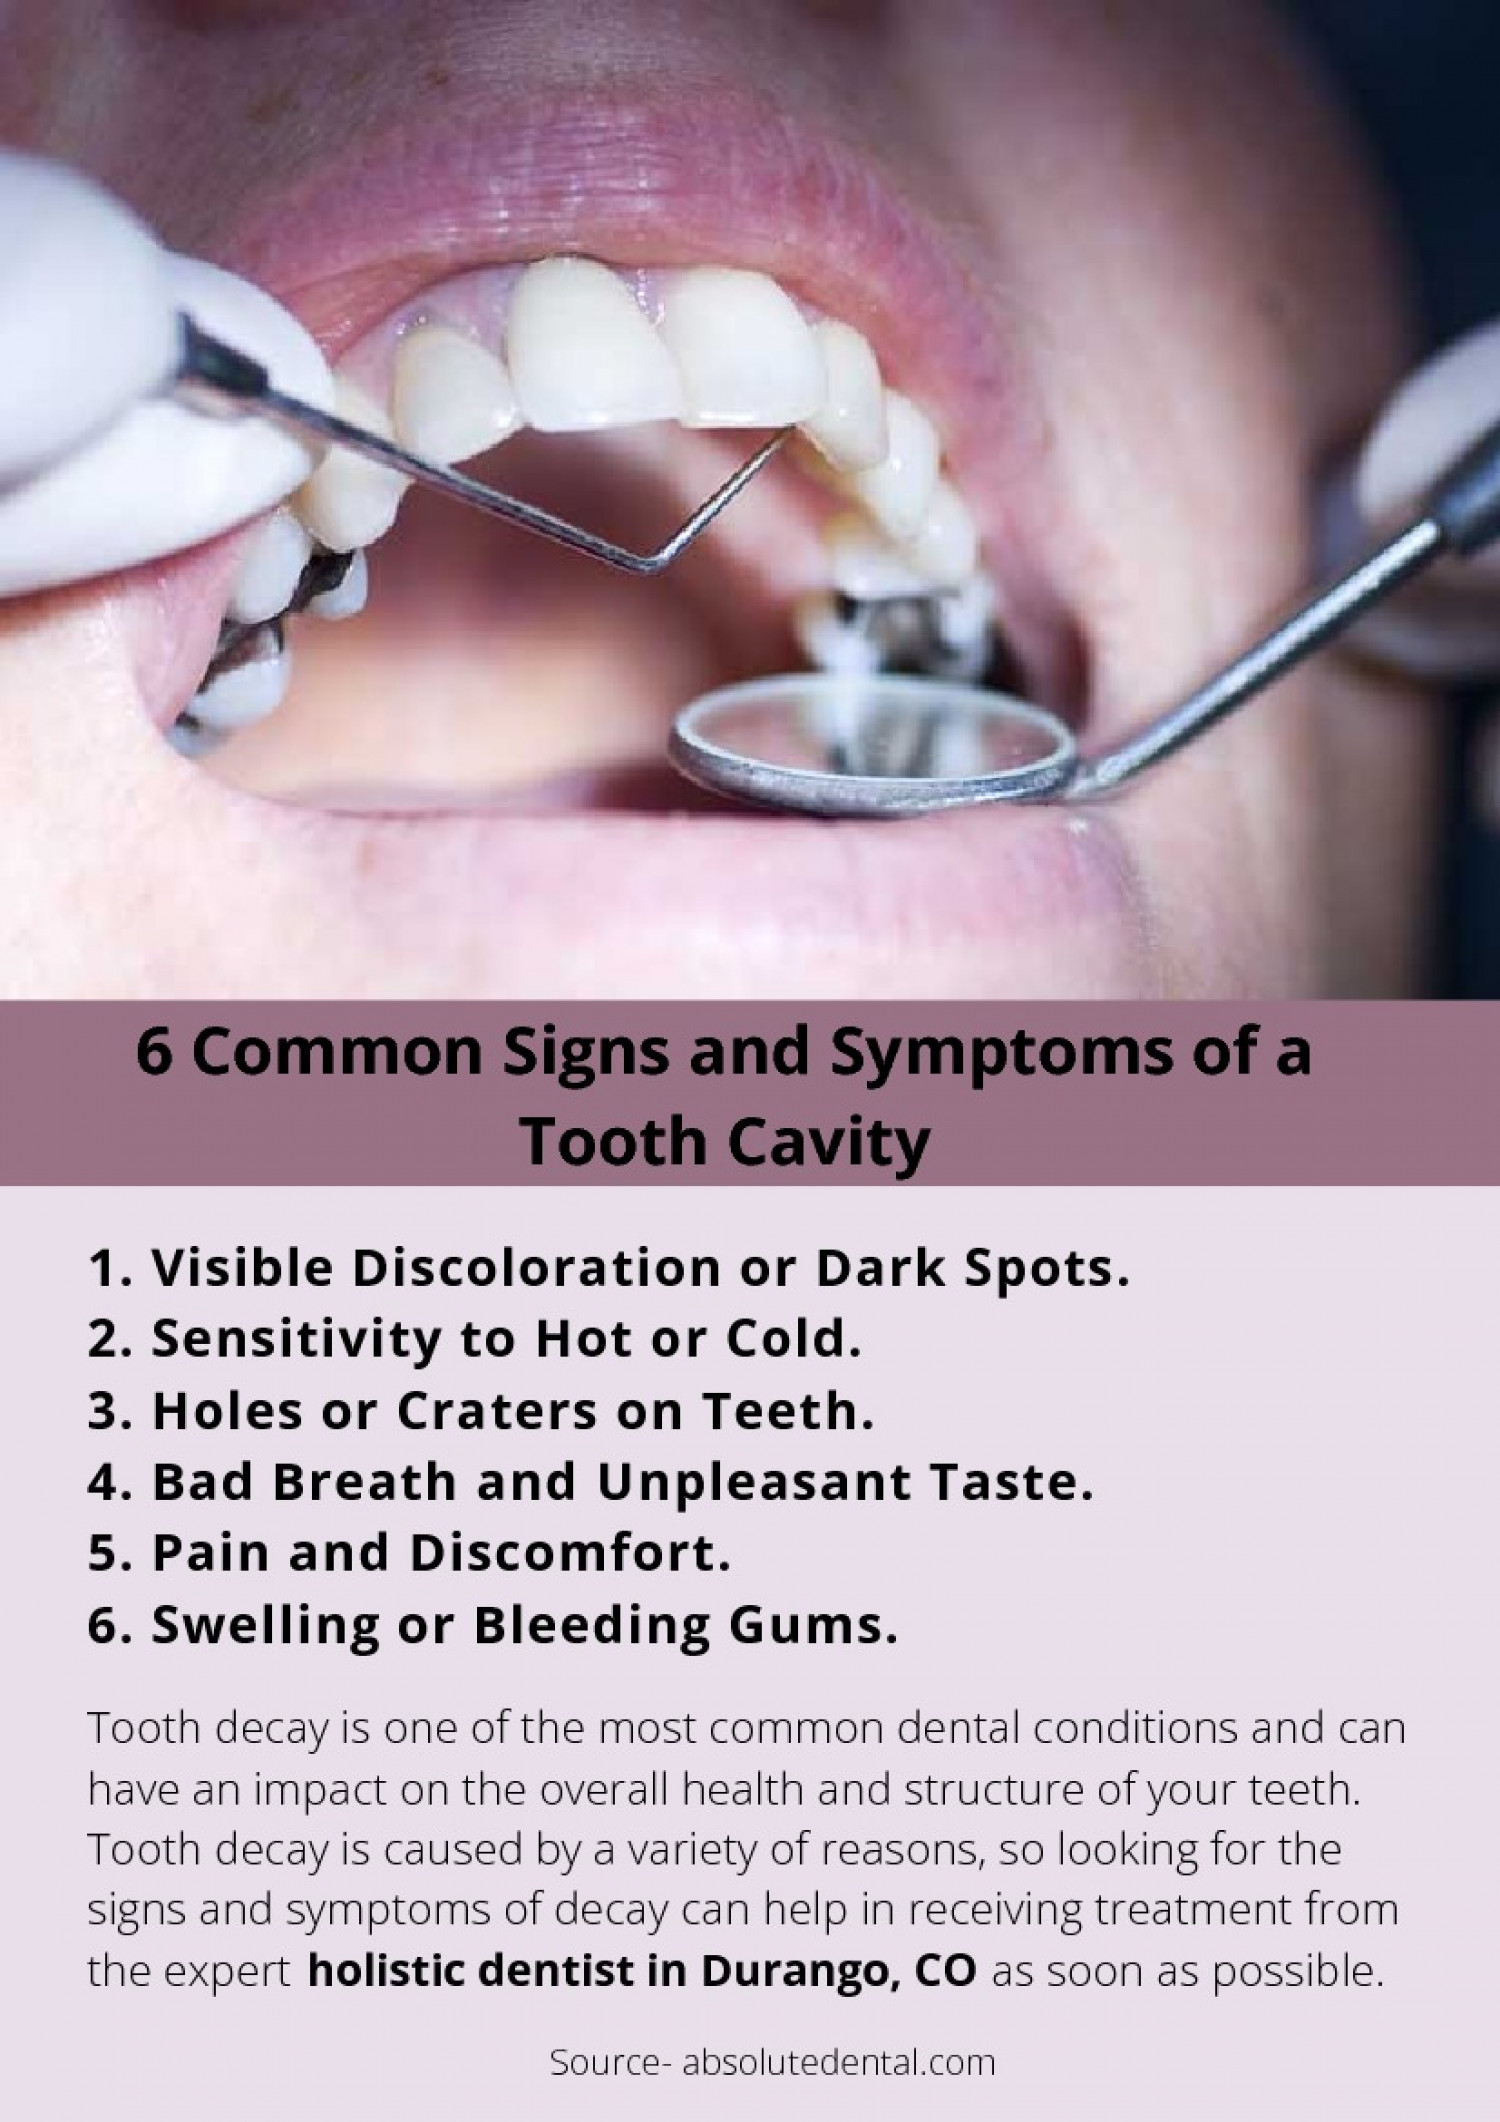 6 Common Signs and Symptoms of a Tooth Cavity Infographic